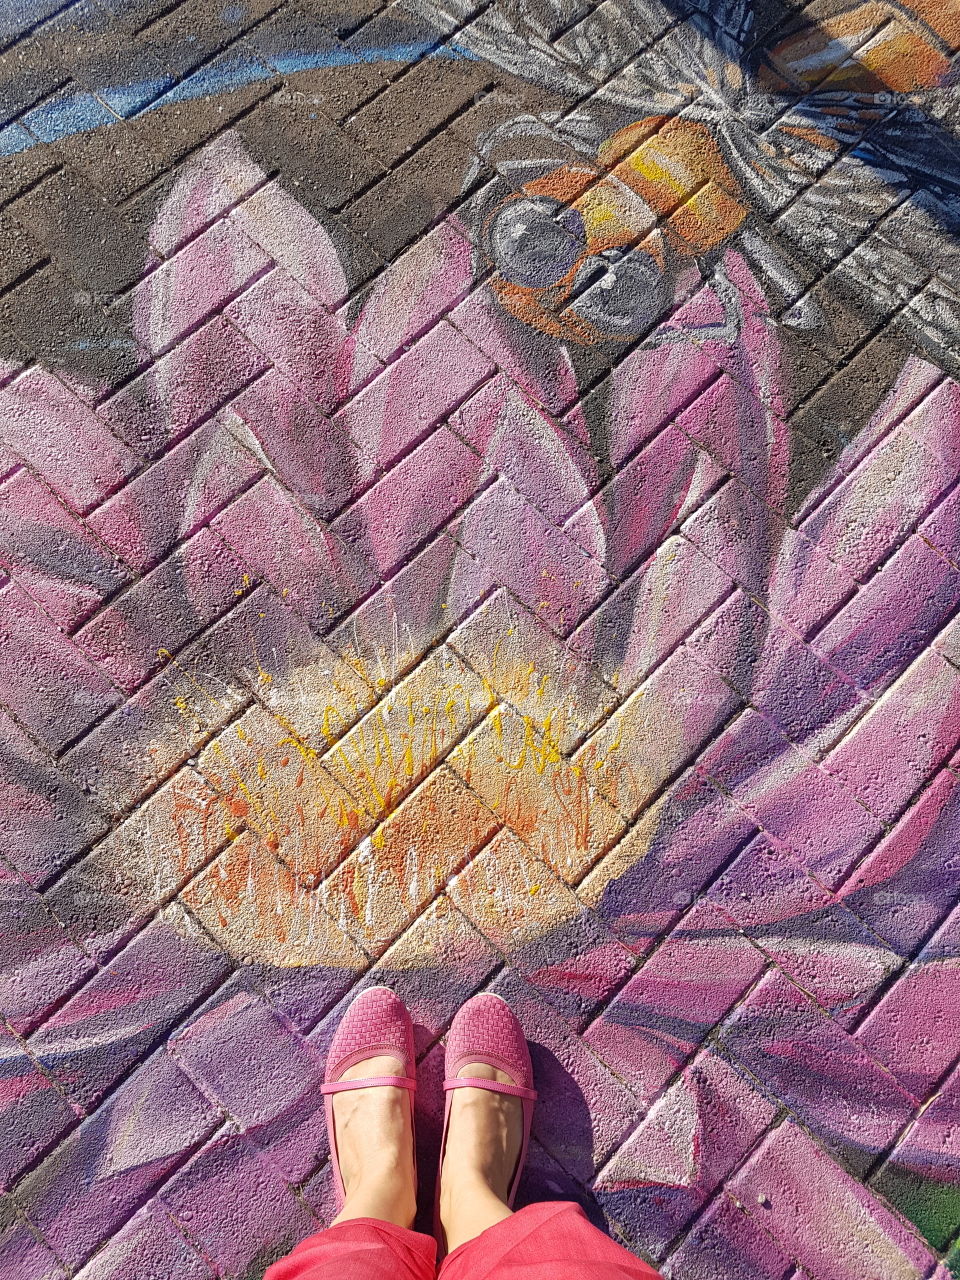 pink shoes and red pants in the yellow middle of a painted lotus flower while a dragonfly looks on. Street art in Vancouver, British Columbia under the cambie street bridge along the seawall.